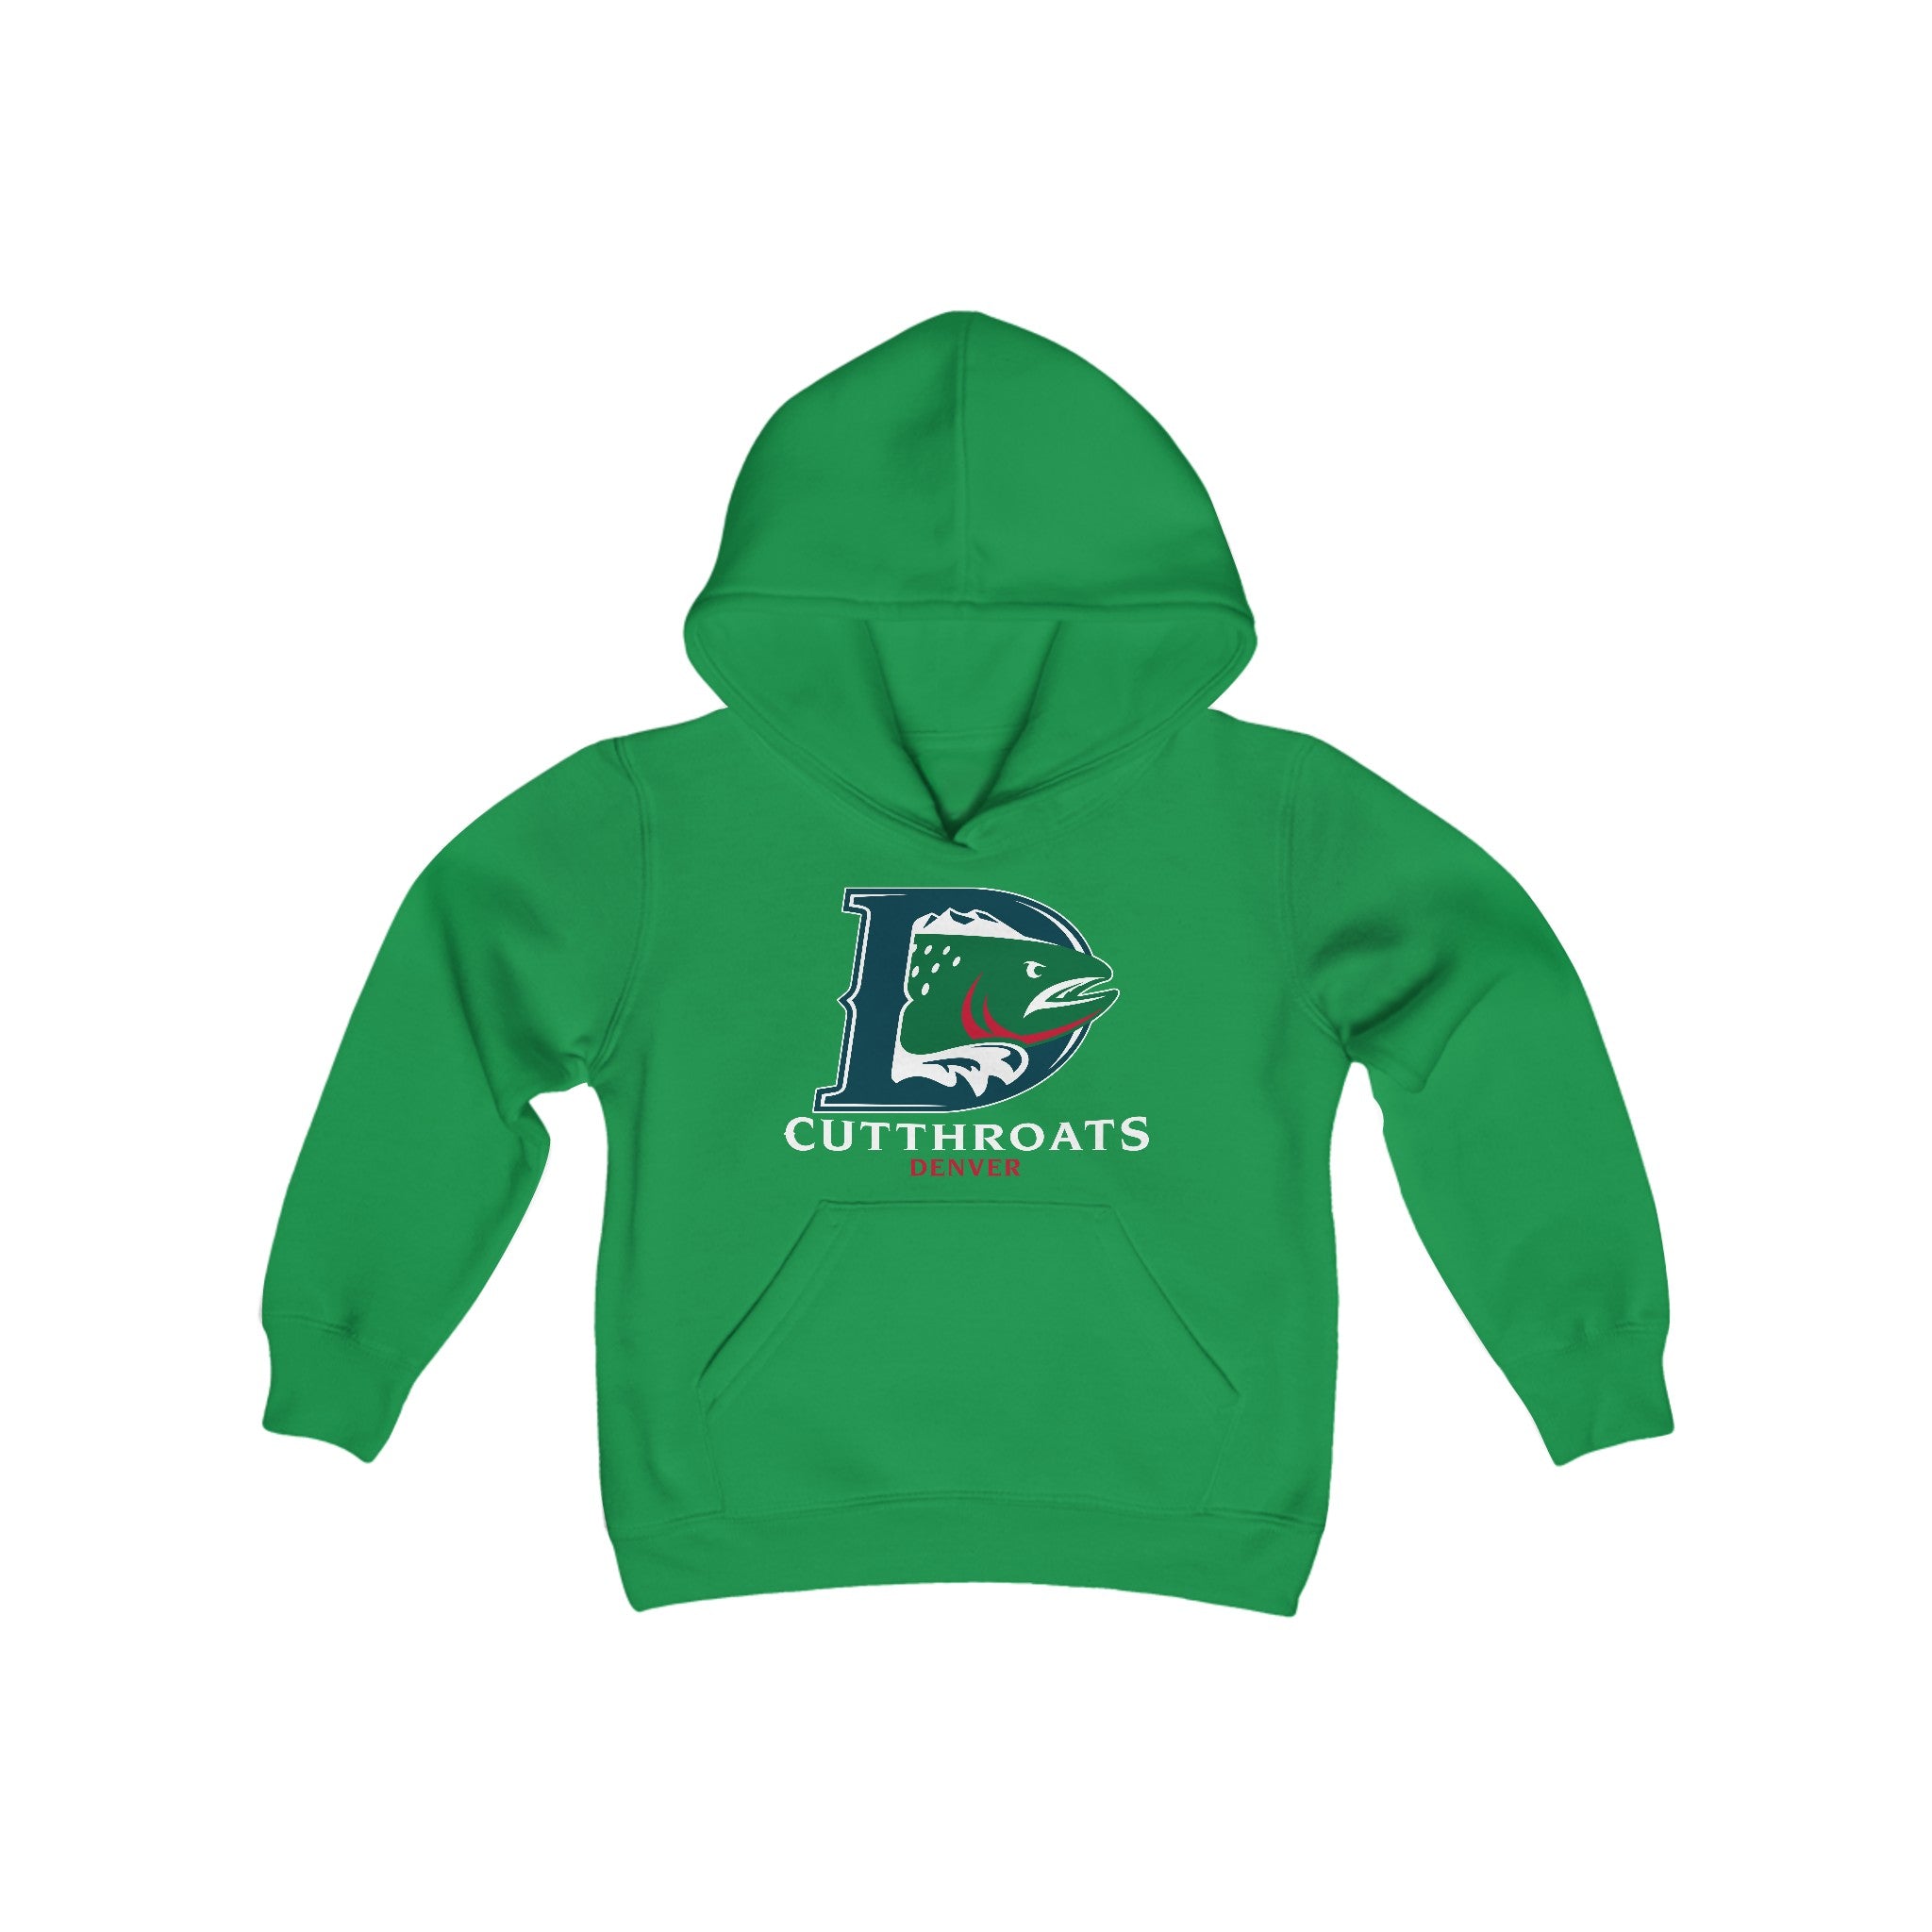 Denver Cutthroats Hoodie (Youth)